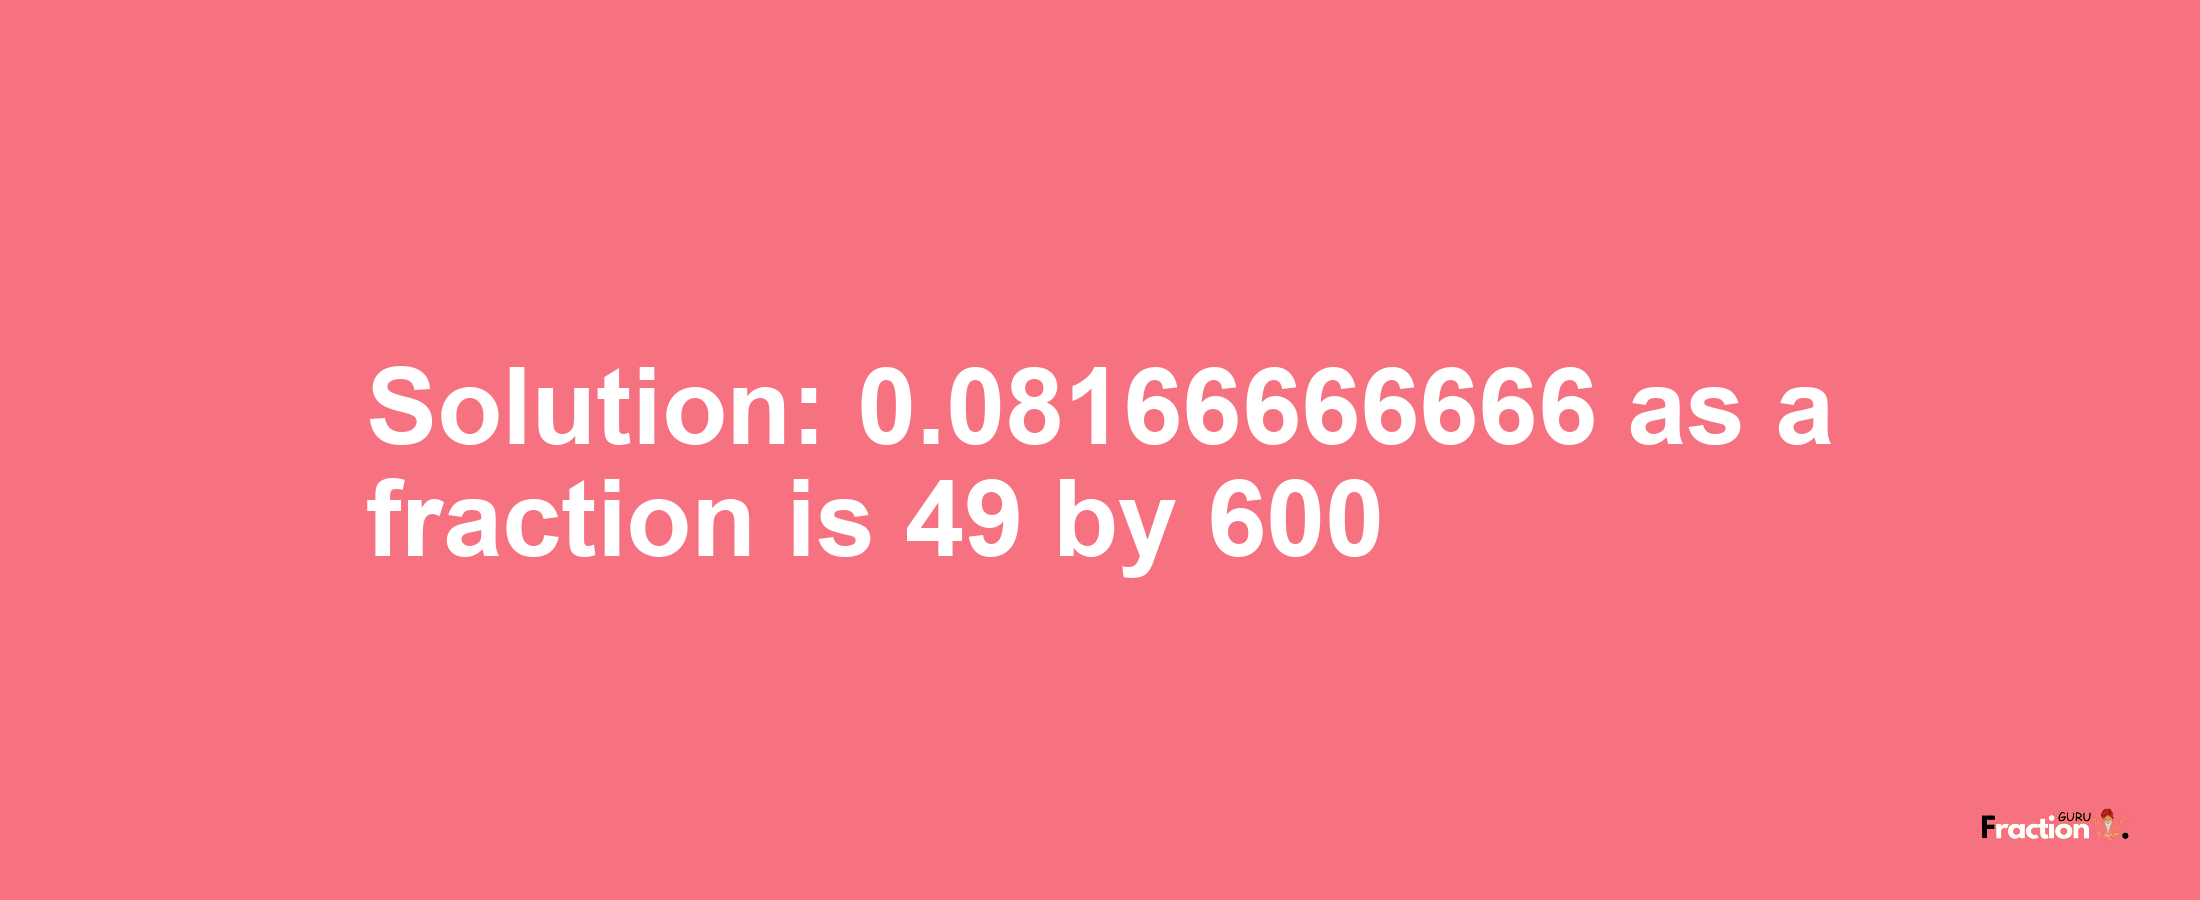 Solution:0.08166666666 as a fraction is 49/600